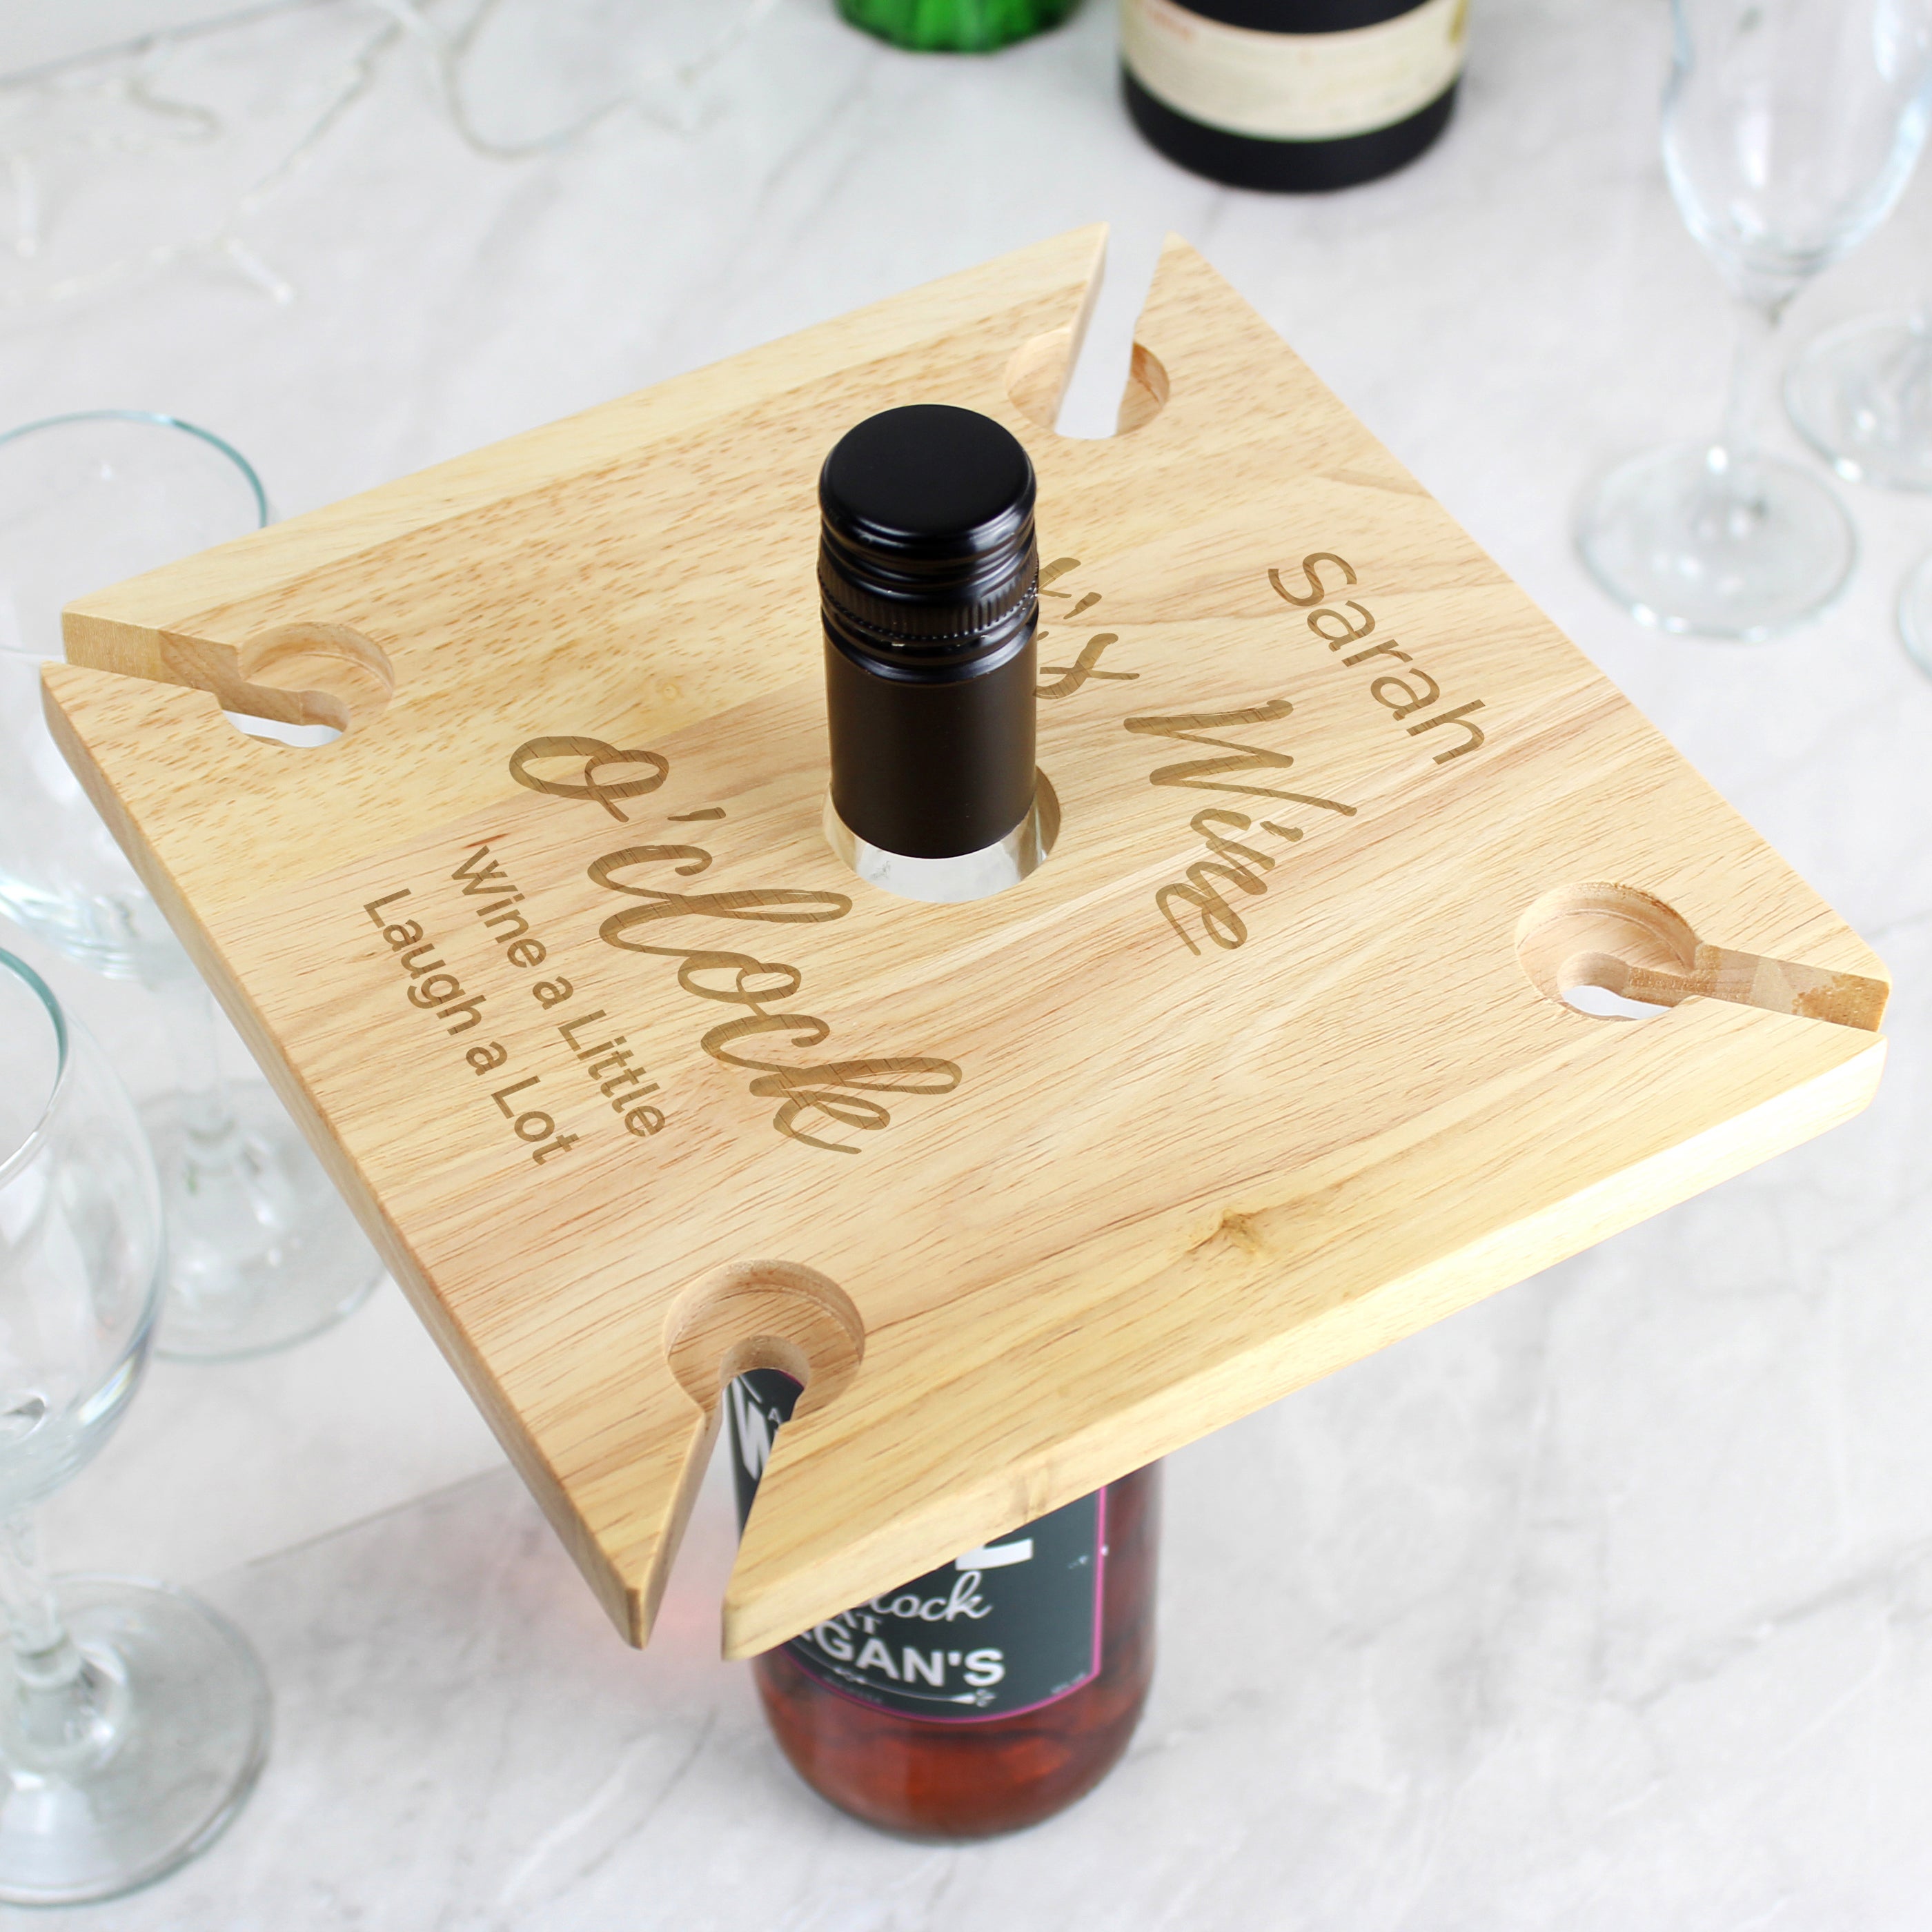 Personalised Wine Oclock Wooden Four Wine Glasses And Bottle Holder Natural